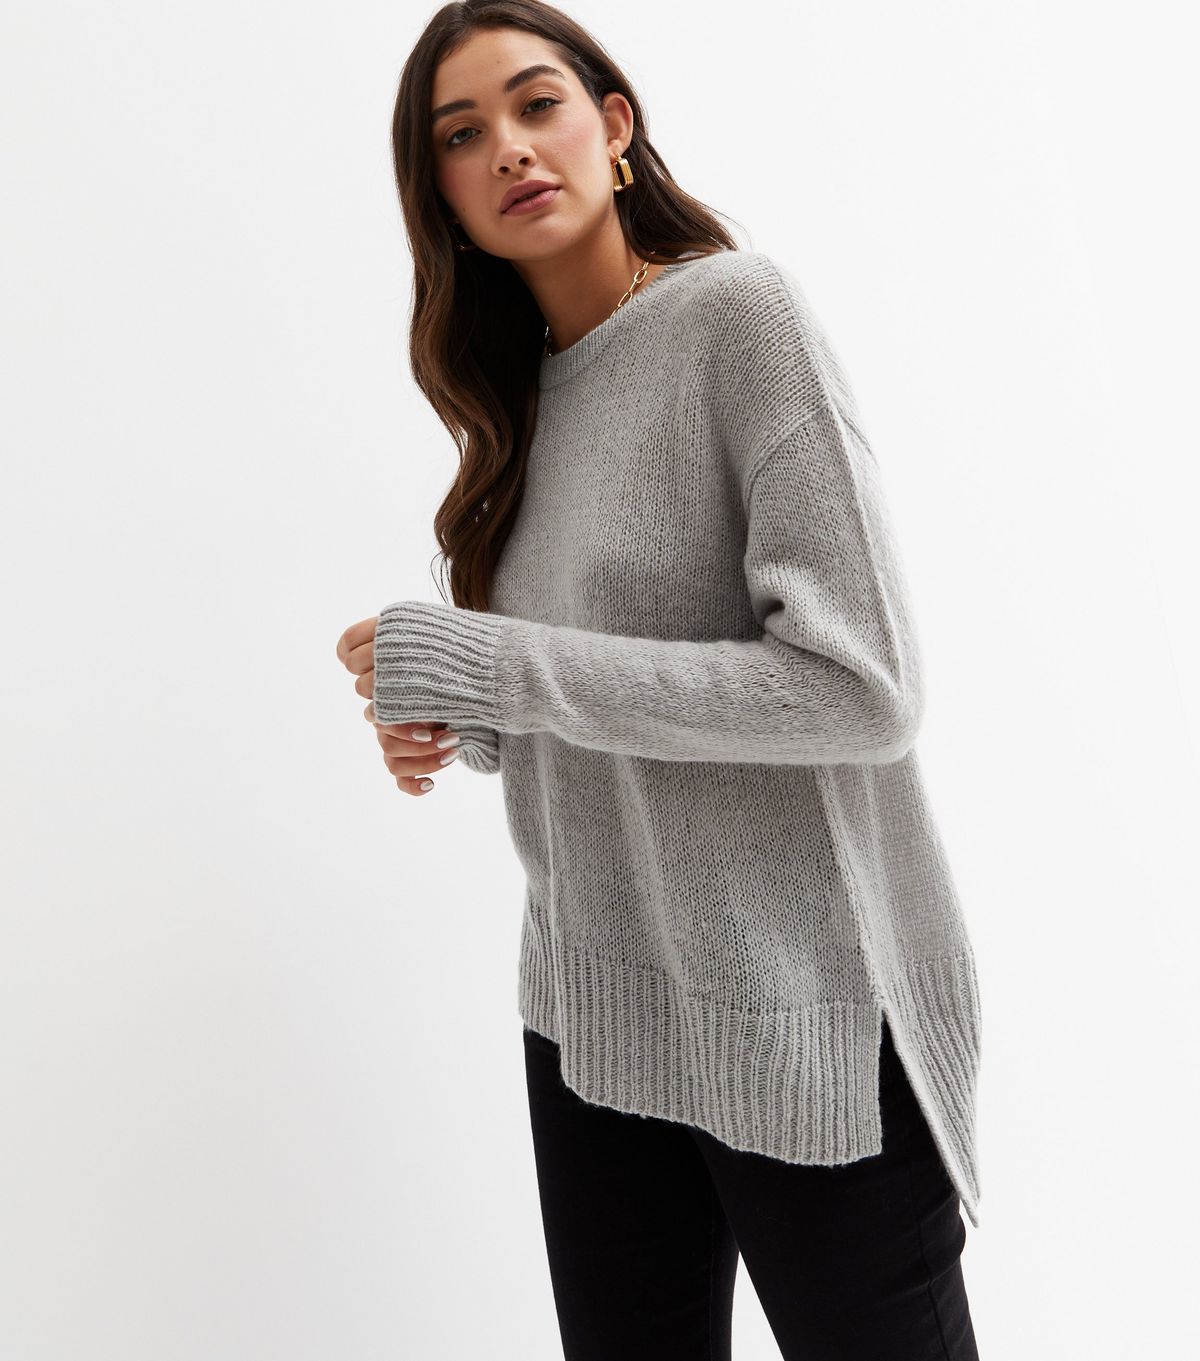 Grey Crew Neck Jumper
						
						Add to Saved Items
						Remove from Saved Items | New Look (UK)